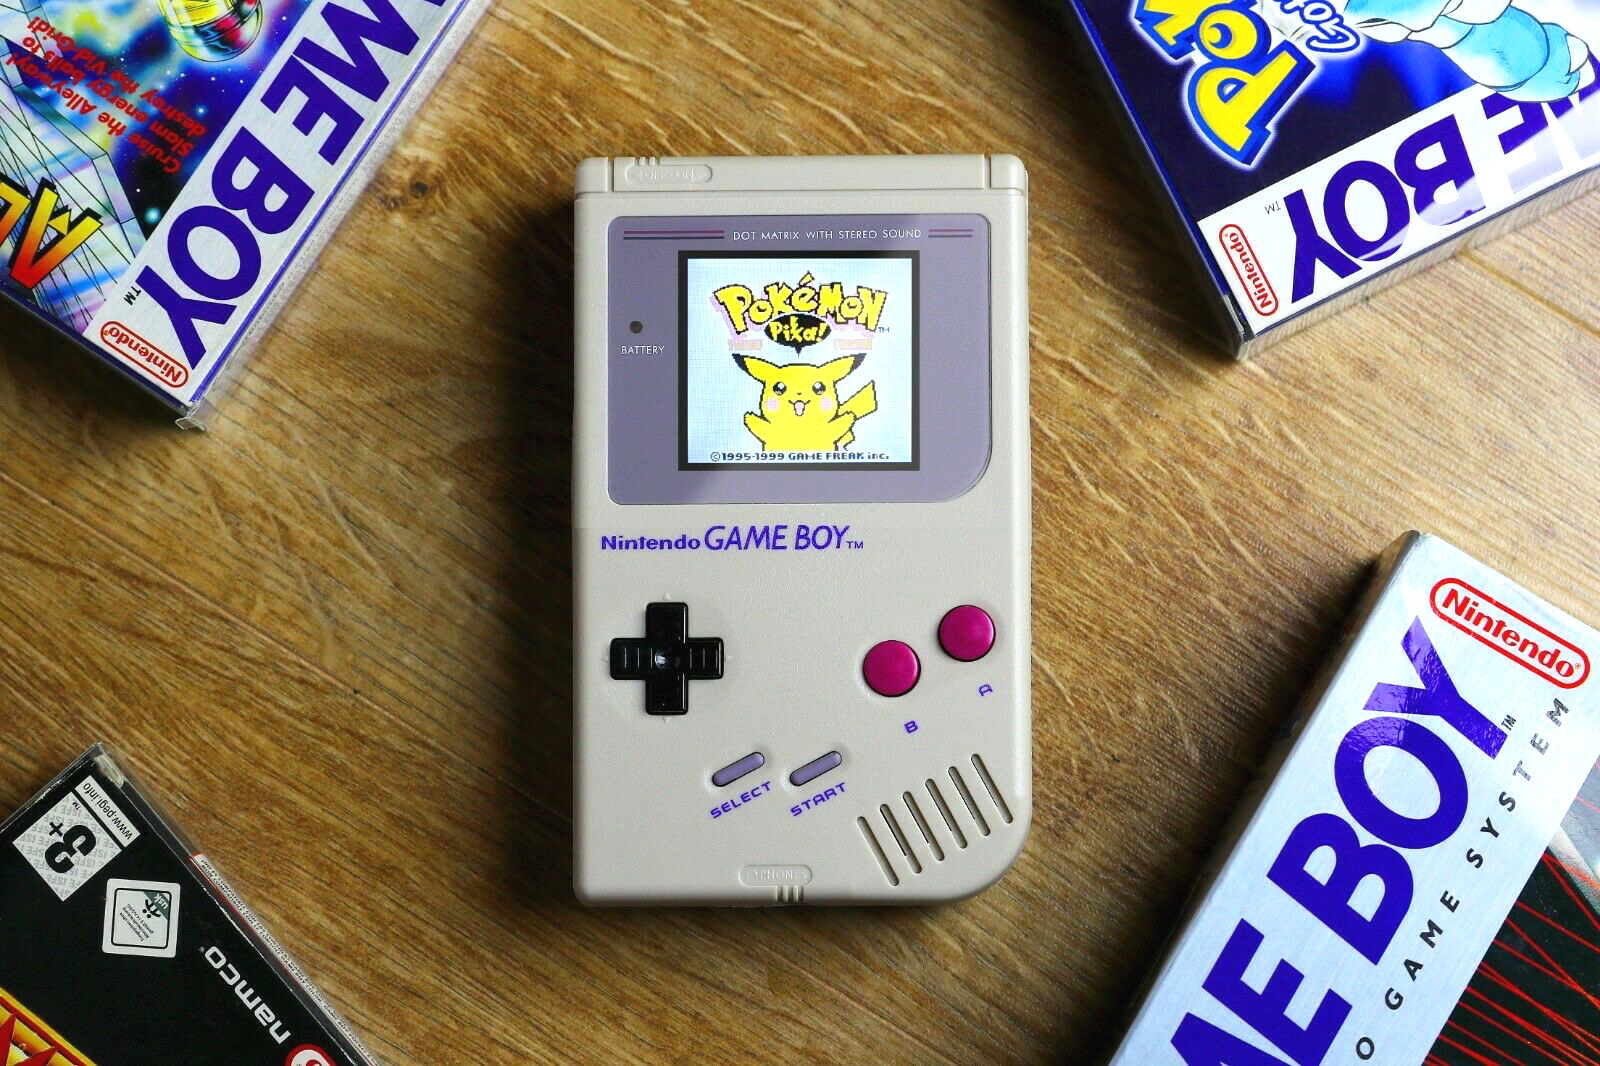 Next generation of GameBoy Screen Mods is Here, IPS Screens in a DMG GameBoy